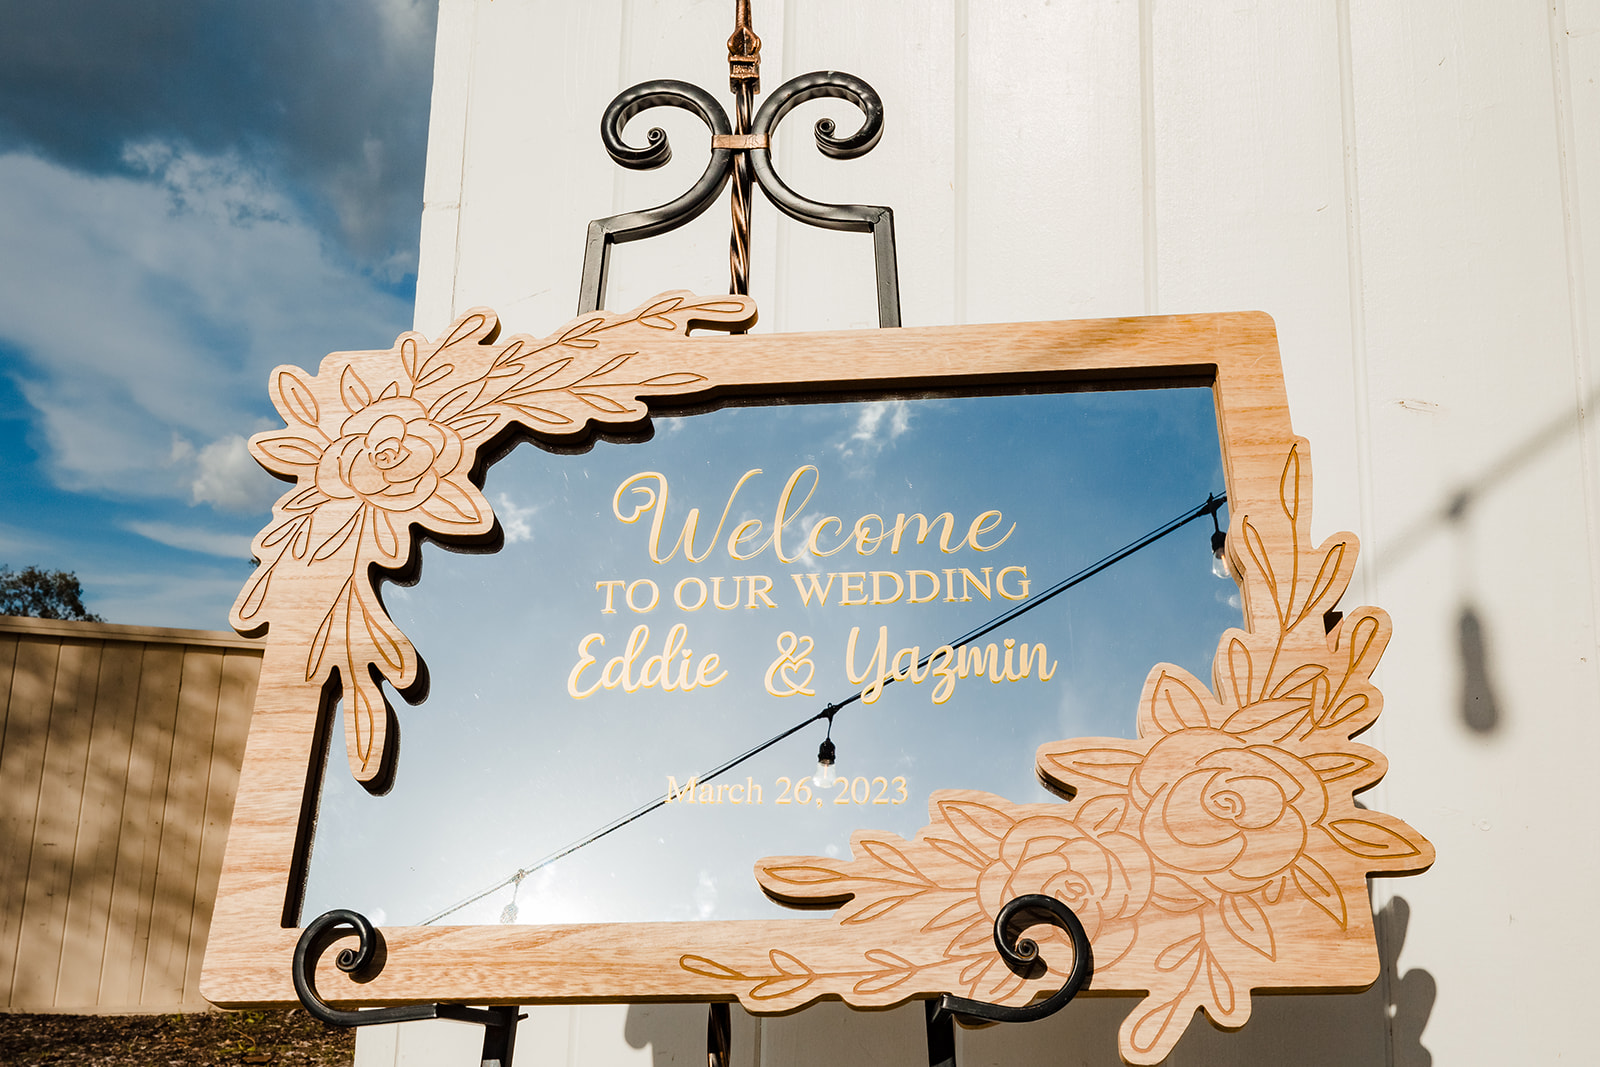 Mirrored wedding welcome sign with wooden frame and engraved flowers